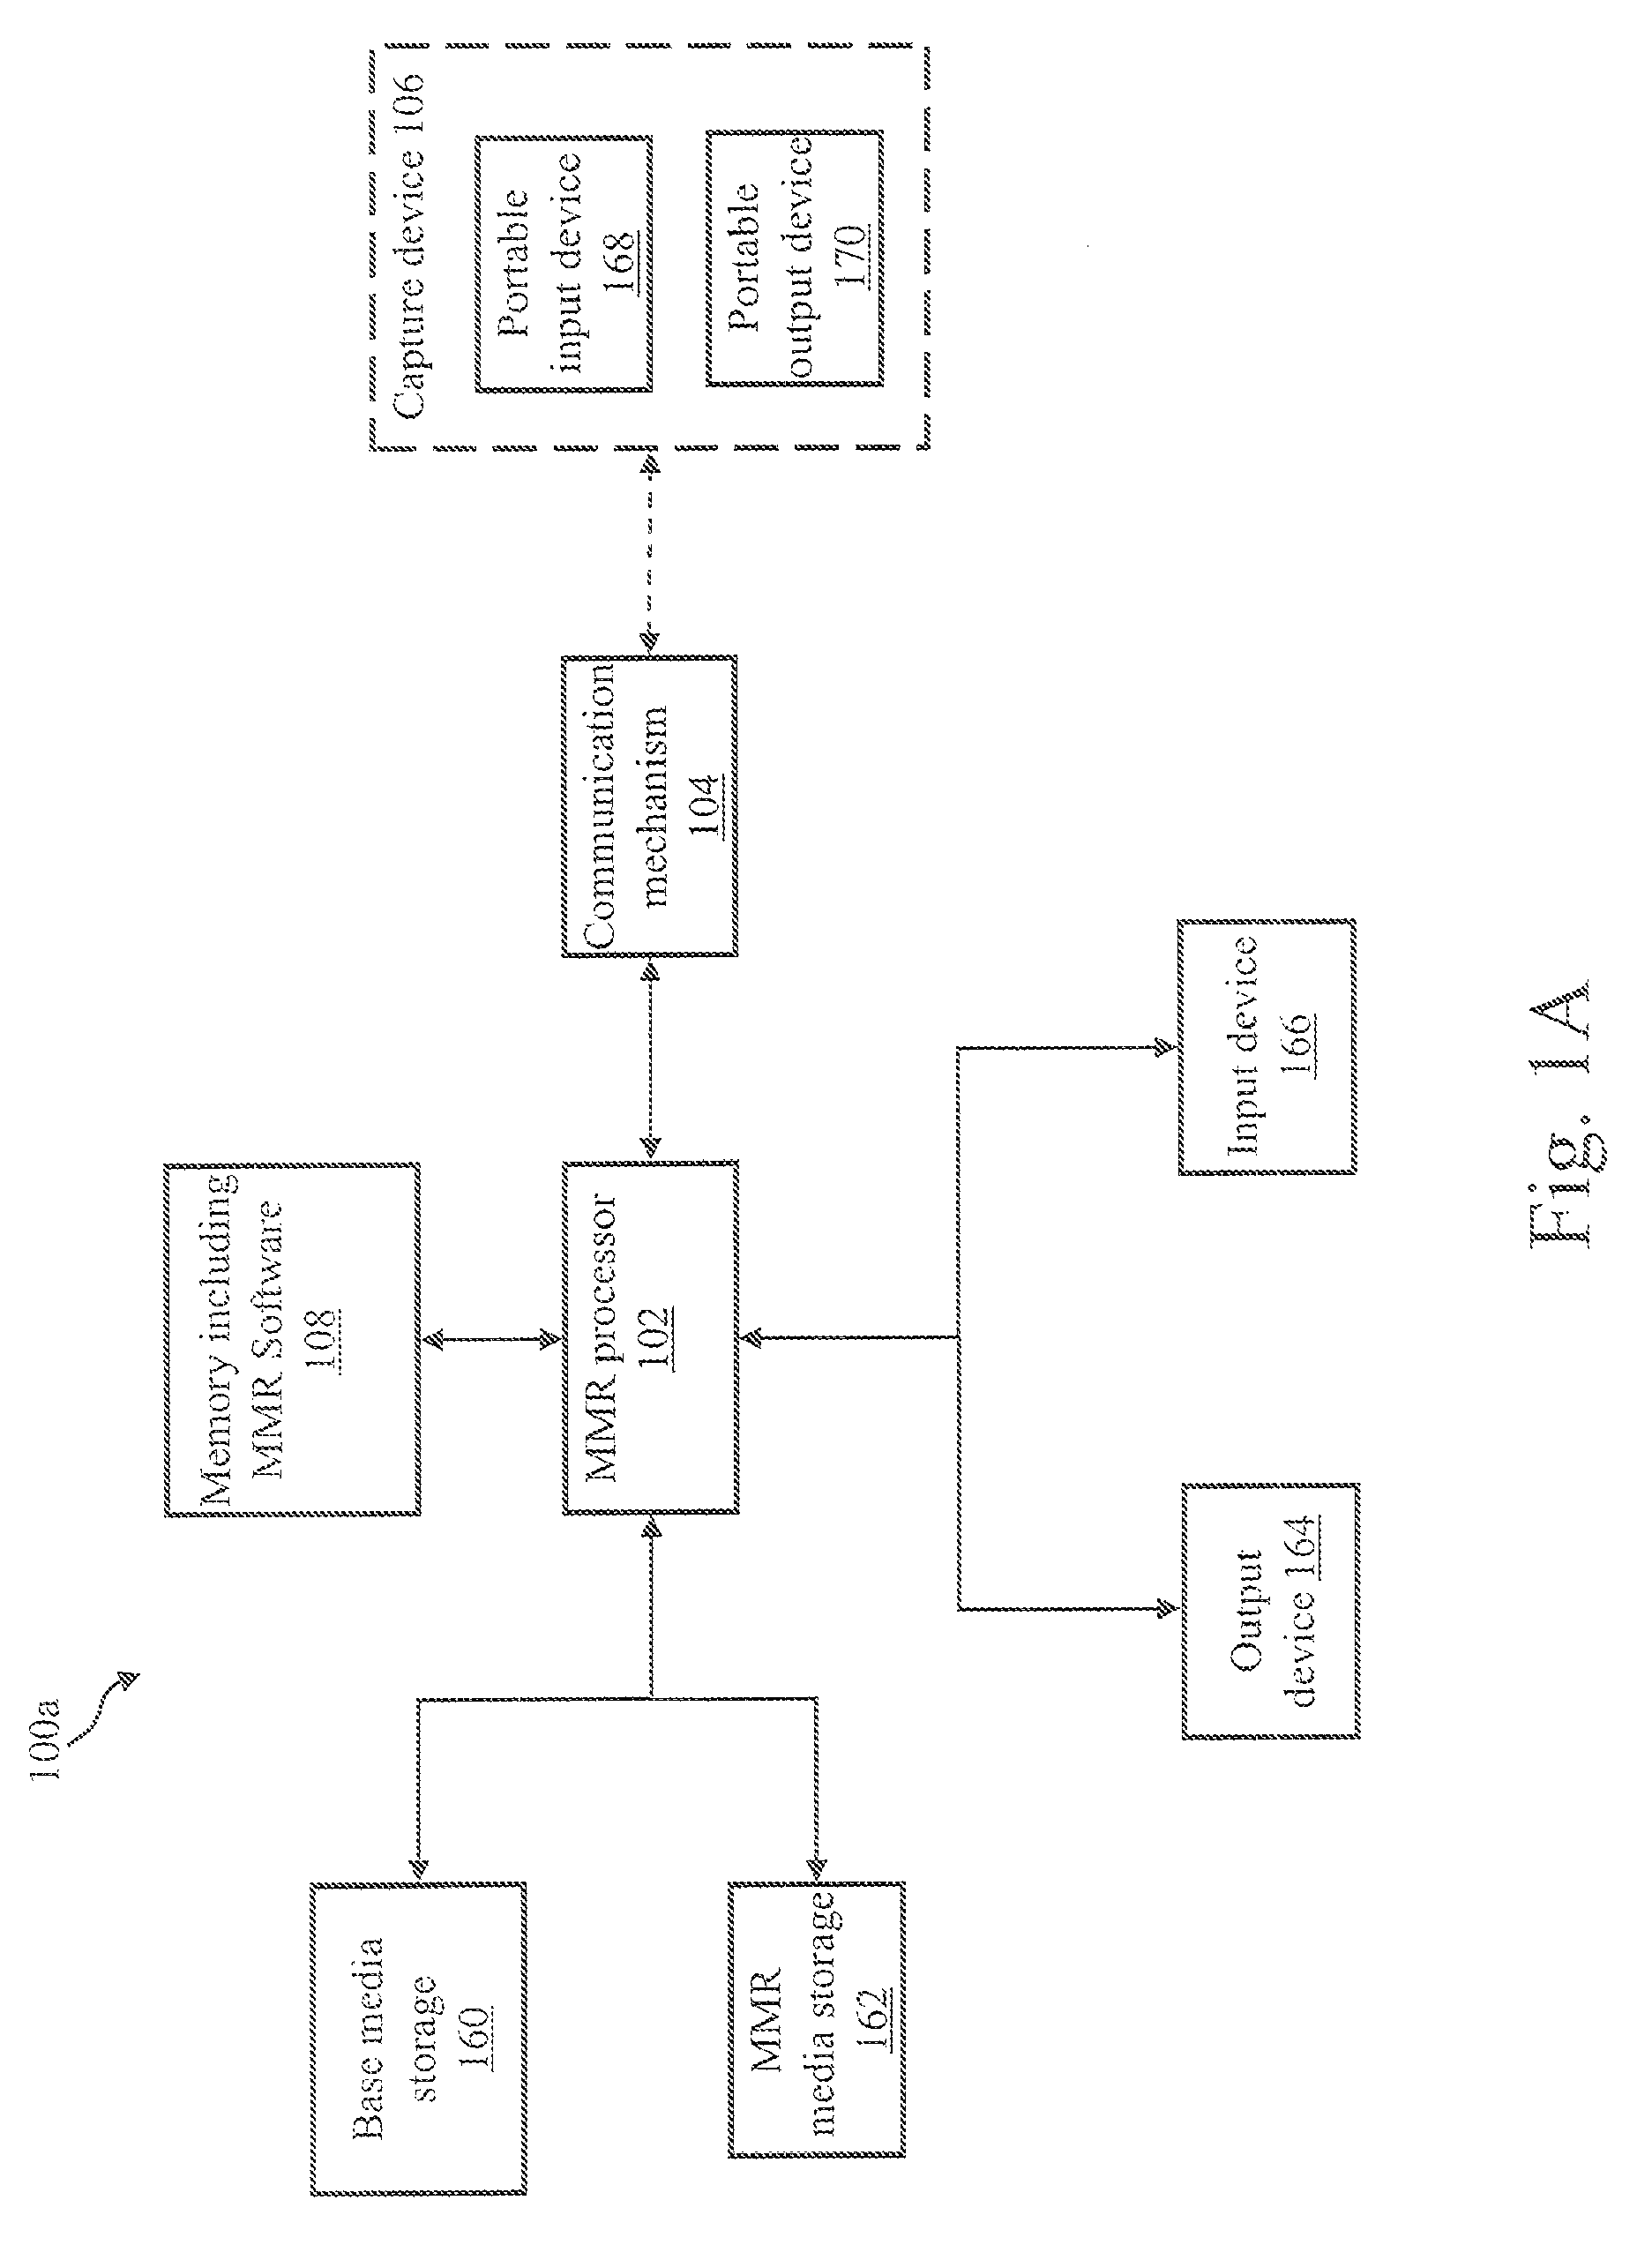 System and method for using individualized mixed document